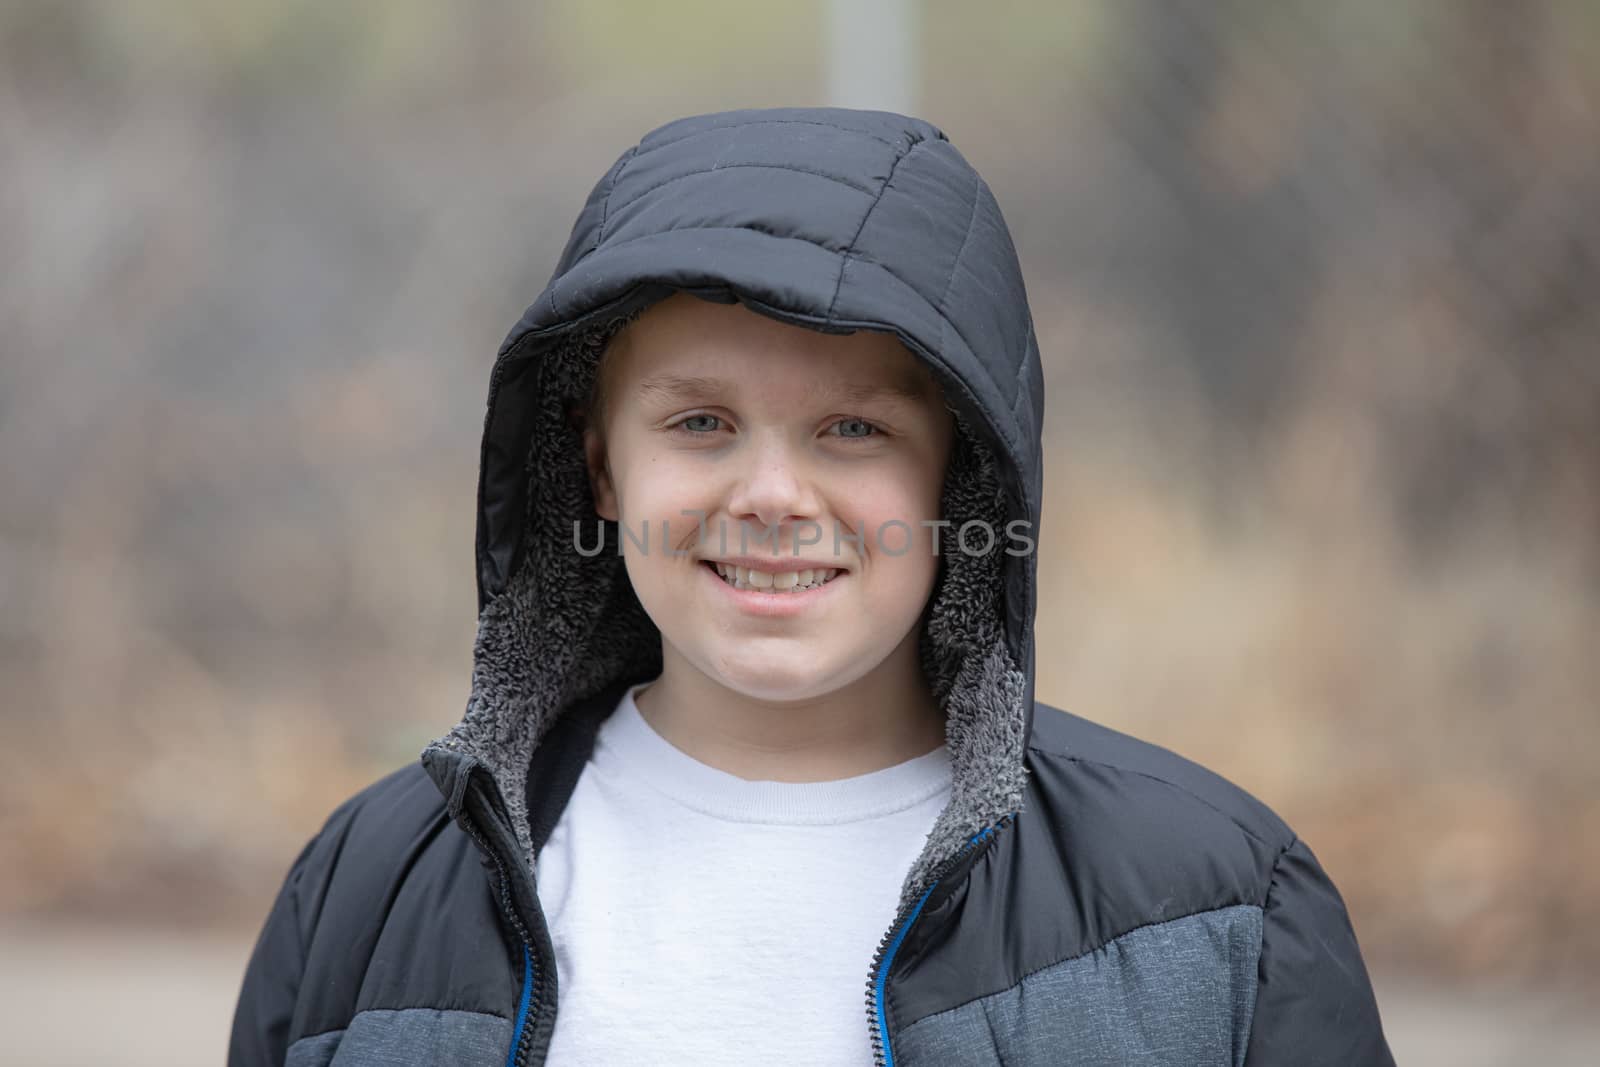 Child smiling while trying to stay warm in cold weather by wearing a coat